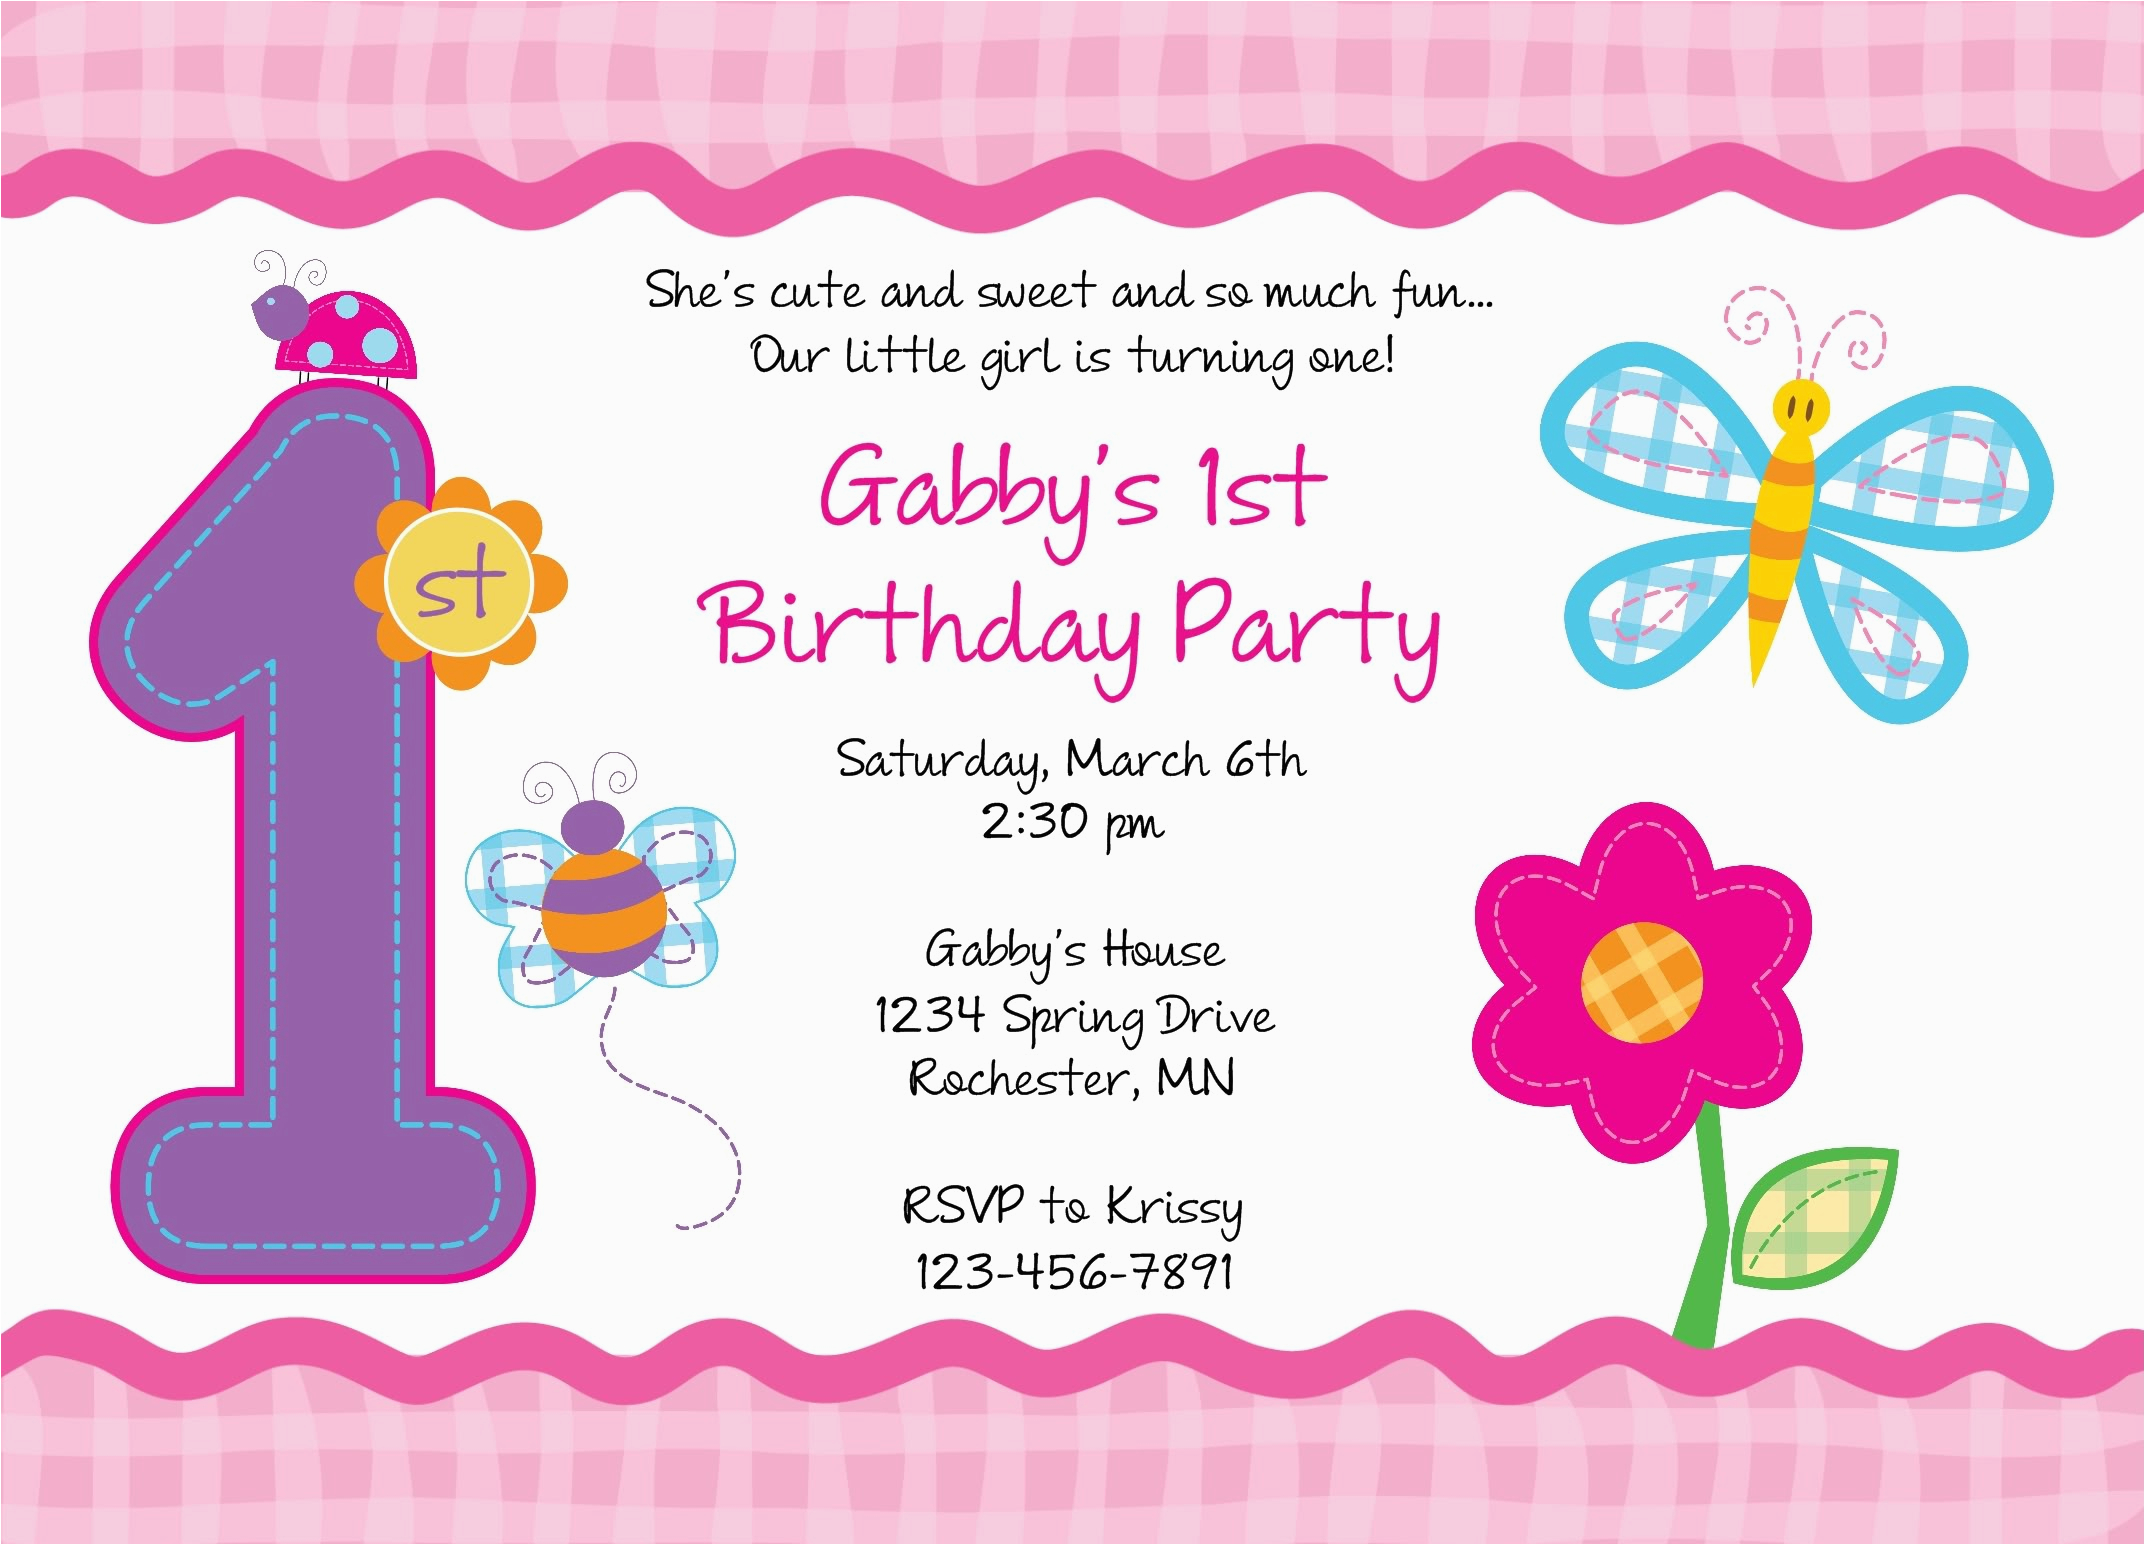 e-invites-for-birthday-party-first-birthday-party-invitations-templates